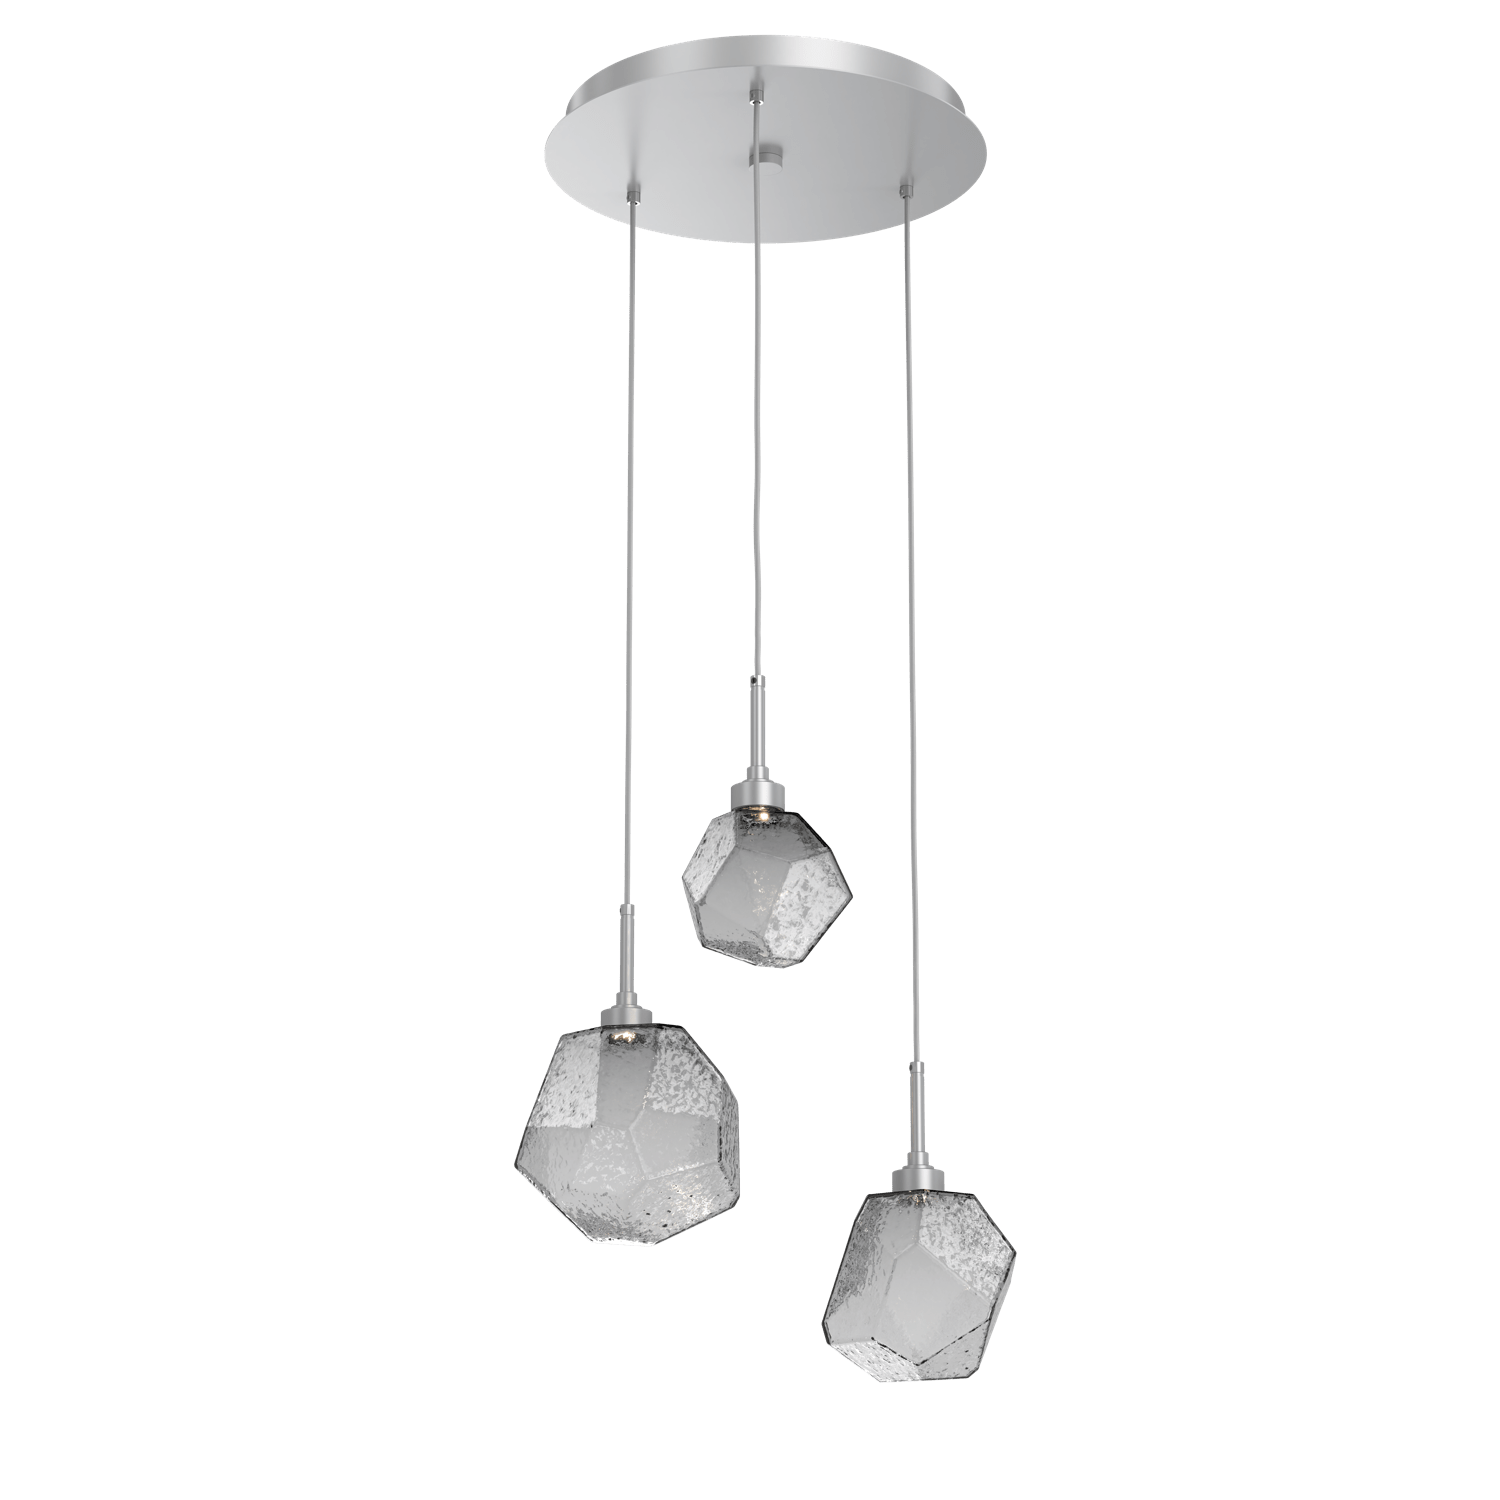 CHB0039-03-CS-S-Hammerton-Studio-Gem-3-light-round-pendant-chandelier-with-classic-silver-finish-and-smoke-blown-glass-shades-and-LED-lamping